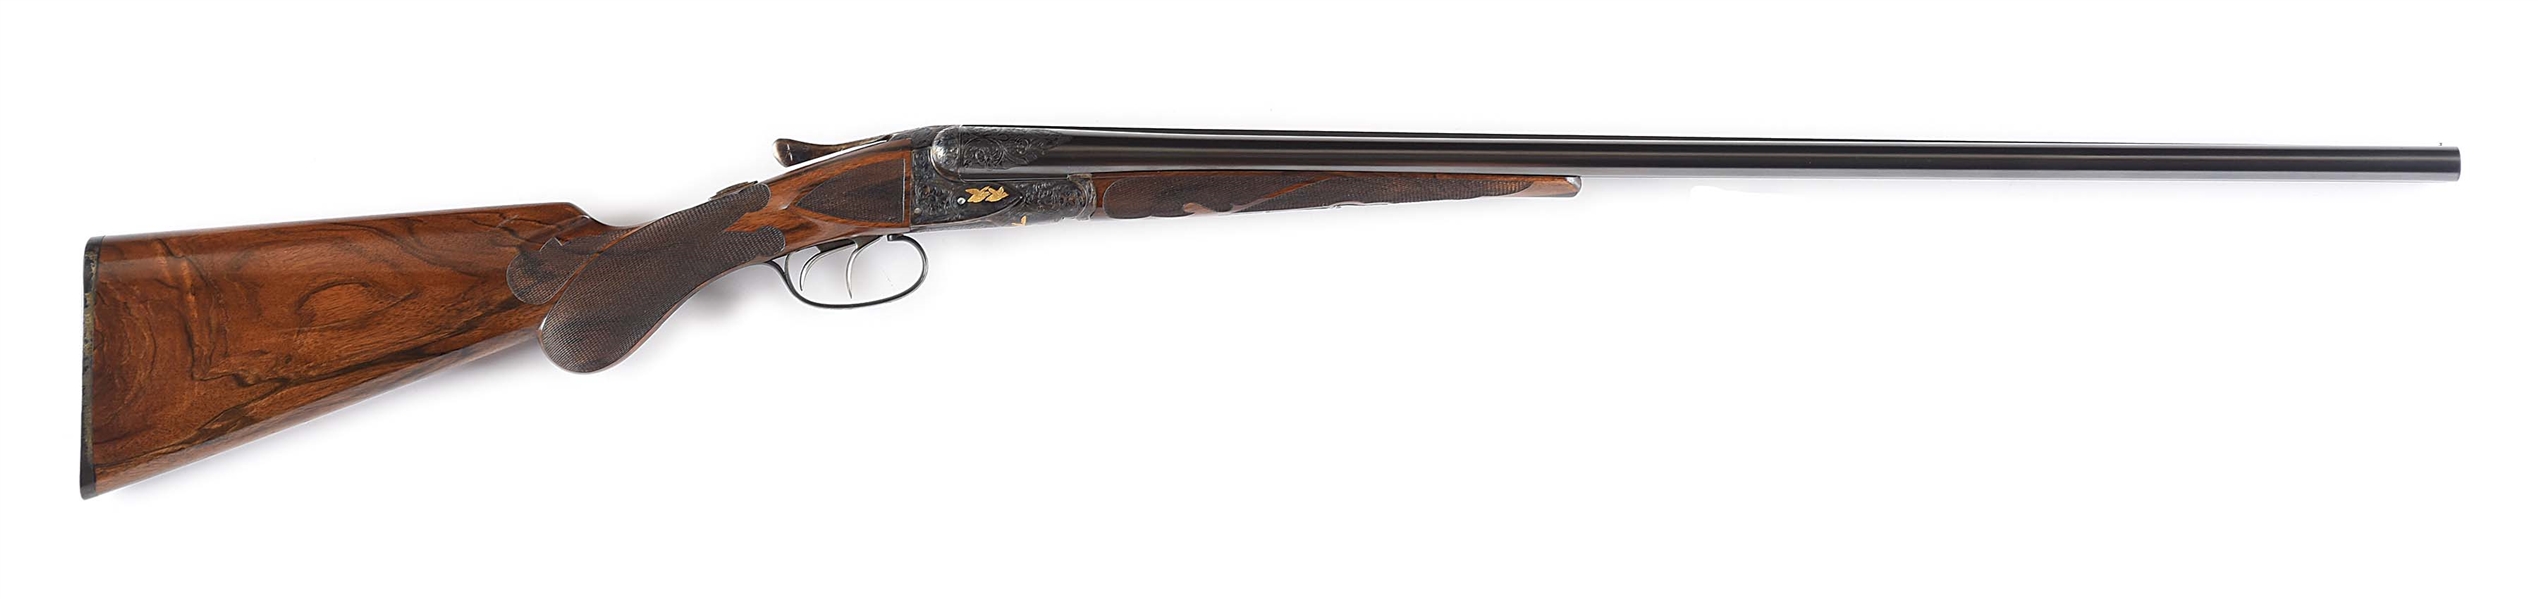 (C) 20 GAUGE A. H. FOX AE SHOTGUN UPGRADED TO DE SPECIAL WITH GOLD INLAY AND CASE.